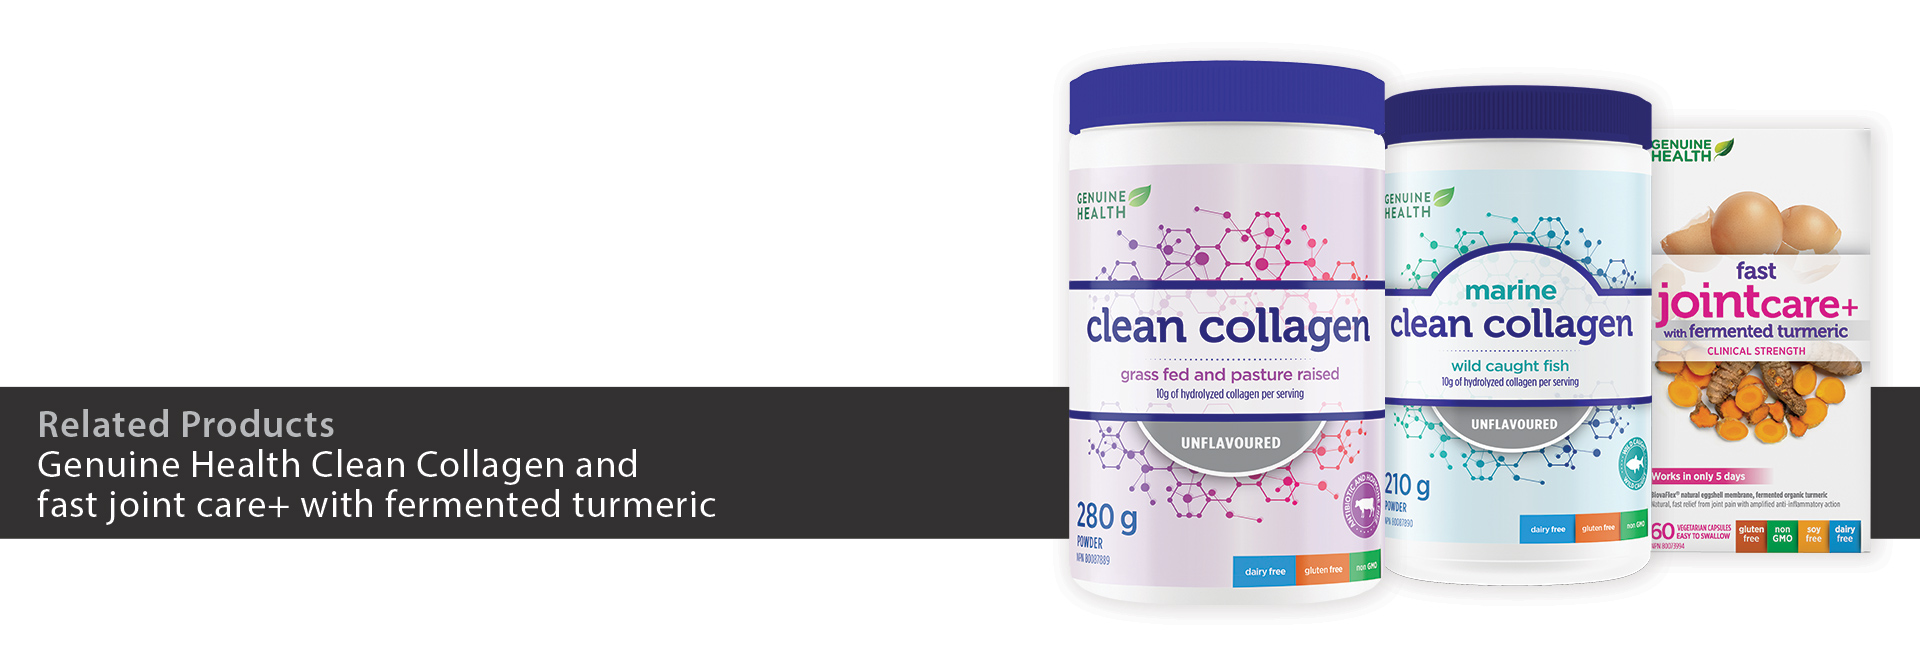 Genuine Health Clean Collagen and fast joint care+ with fermented turmeric